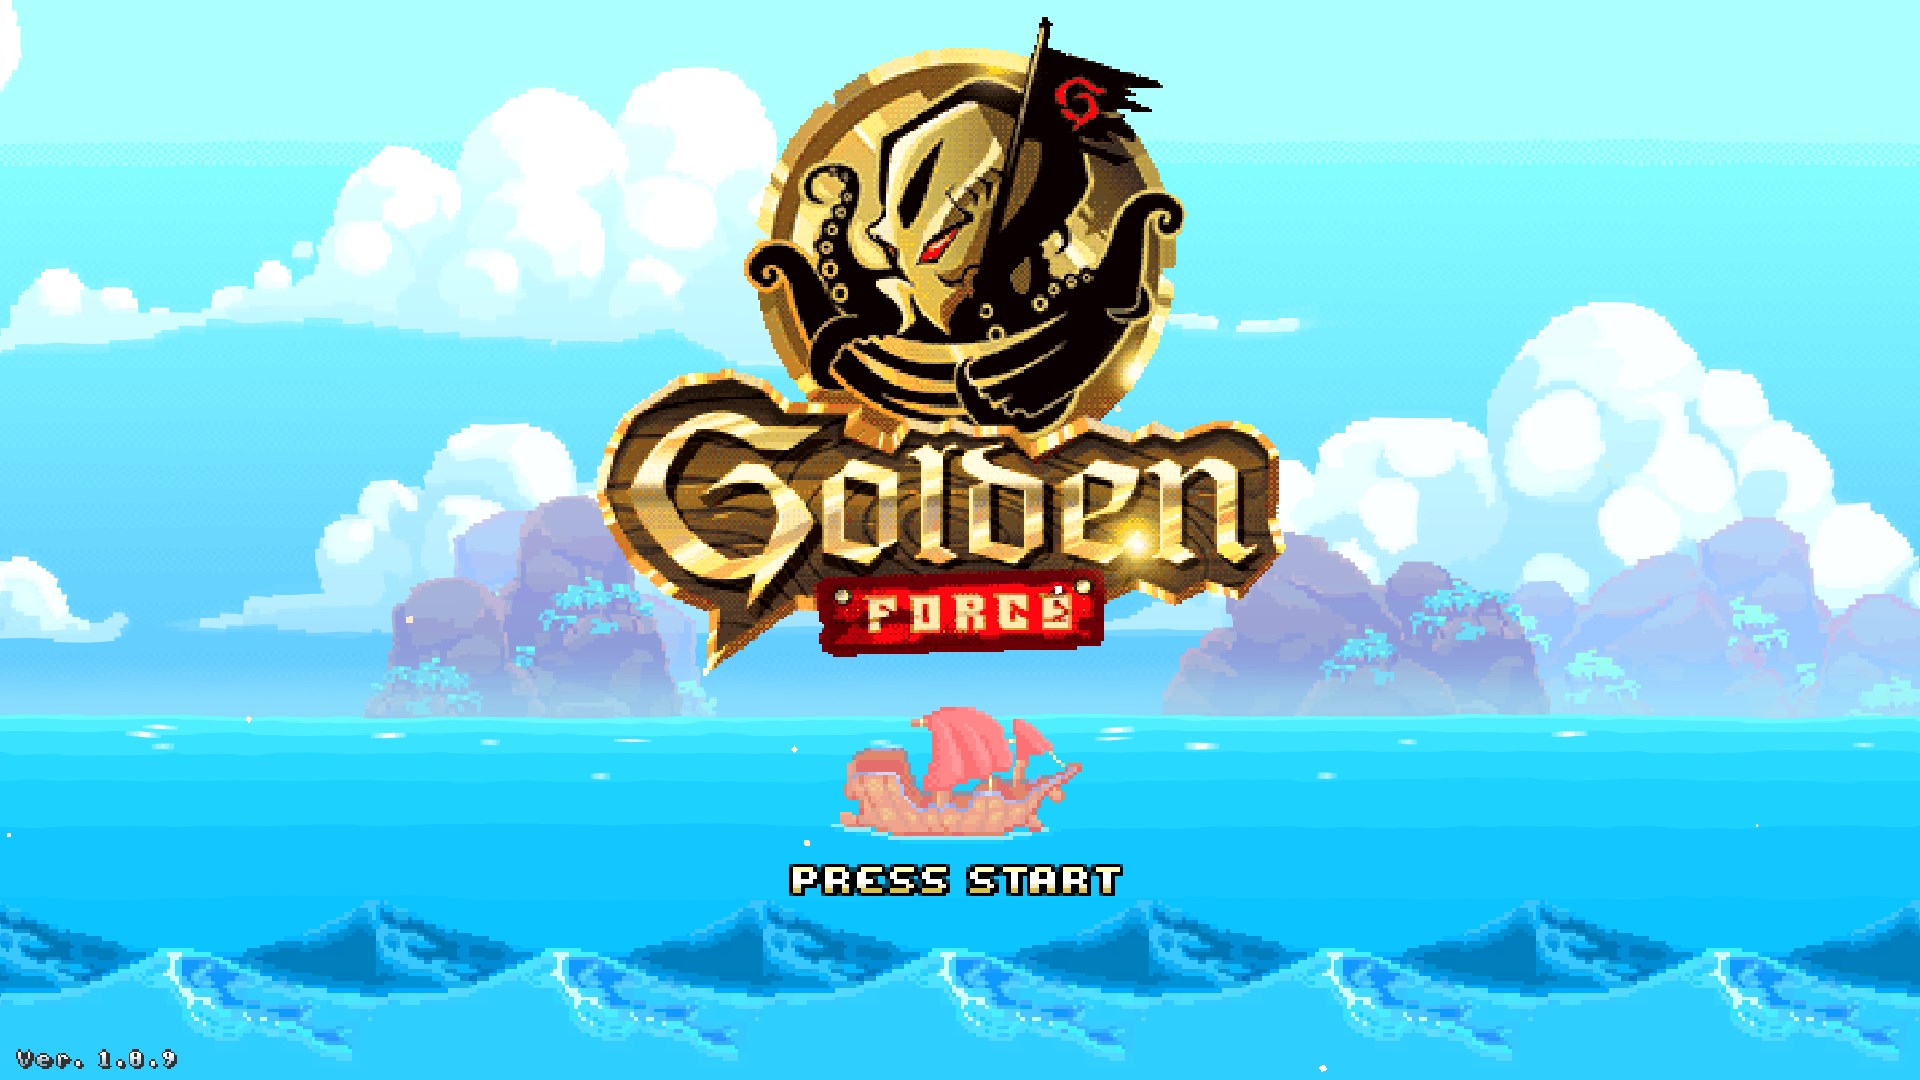 Игра золотые ключи. Golden Force игра. Golden Force ps4. Обзор на игру the Golden Force. Game Gold small.